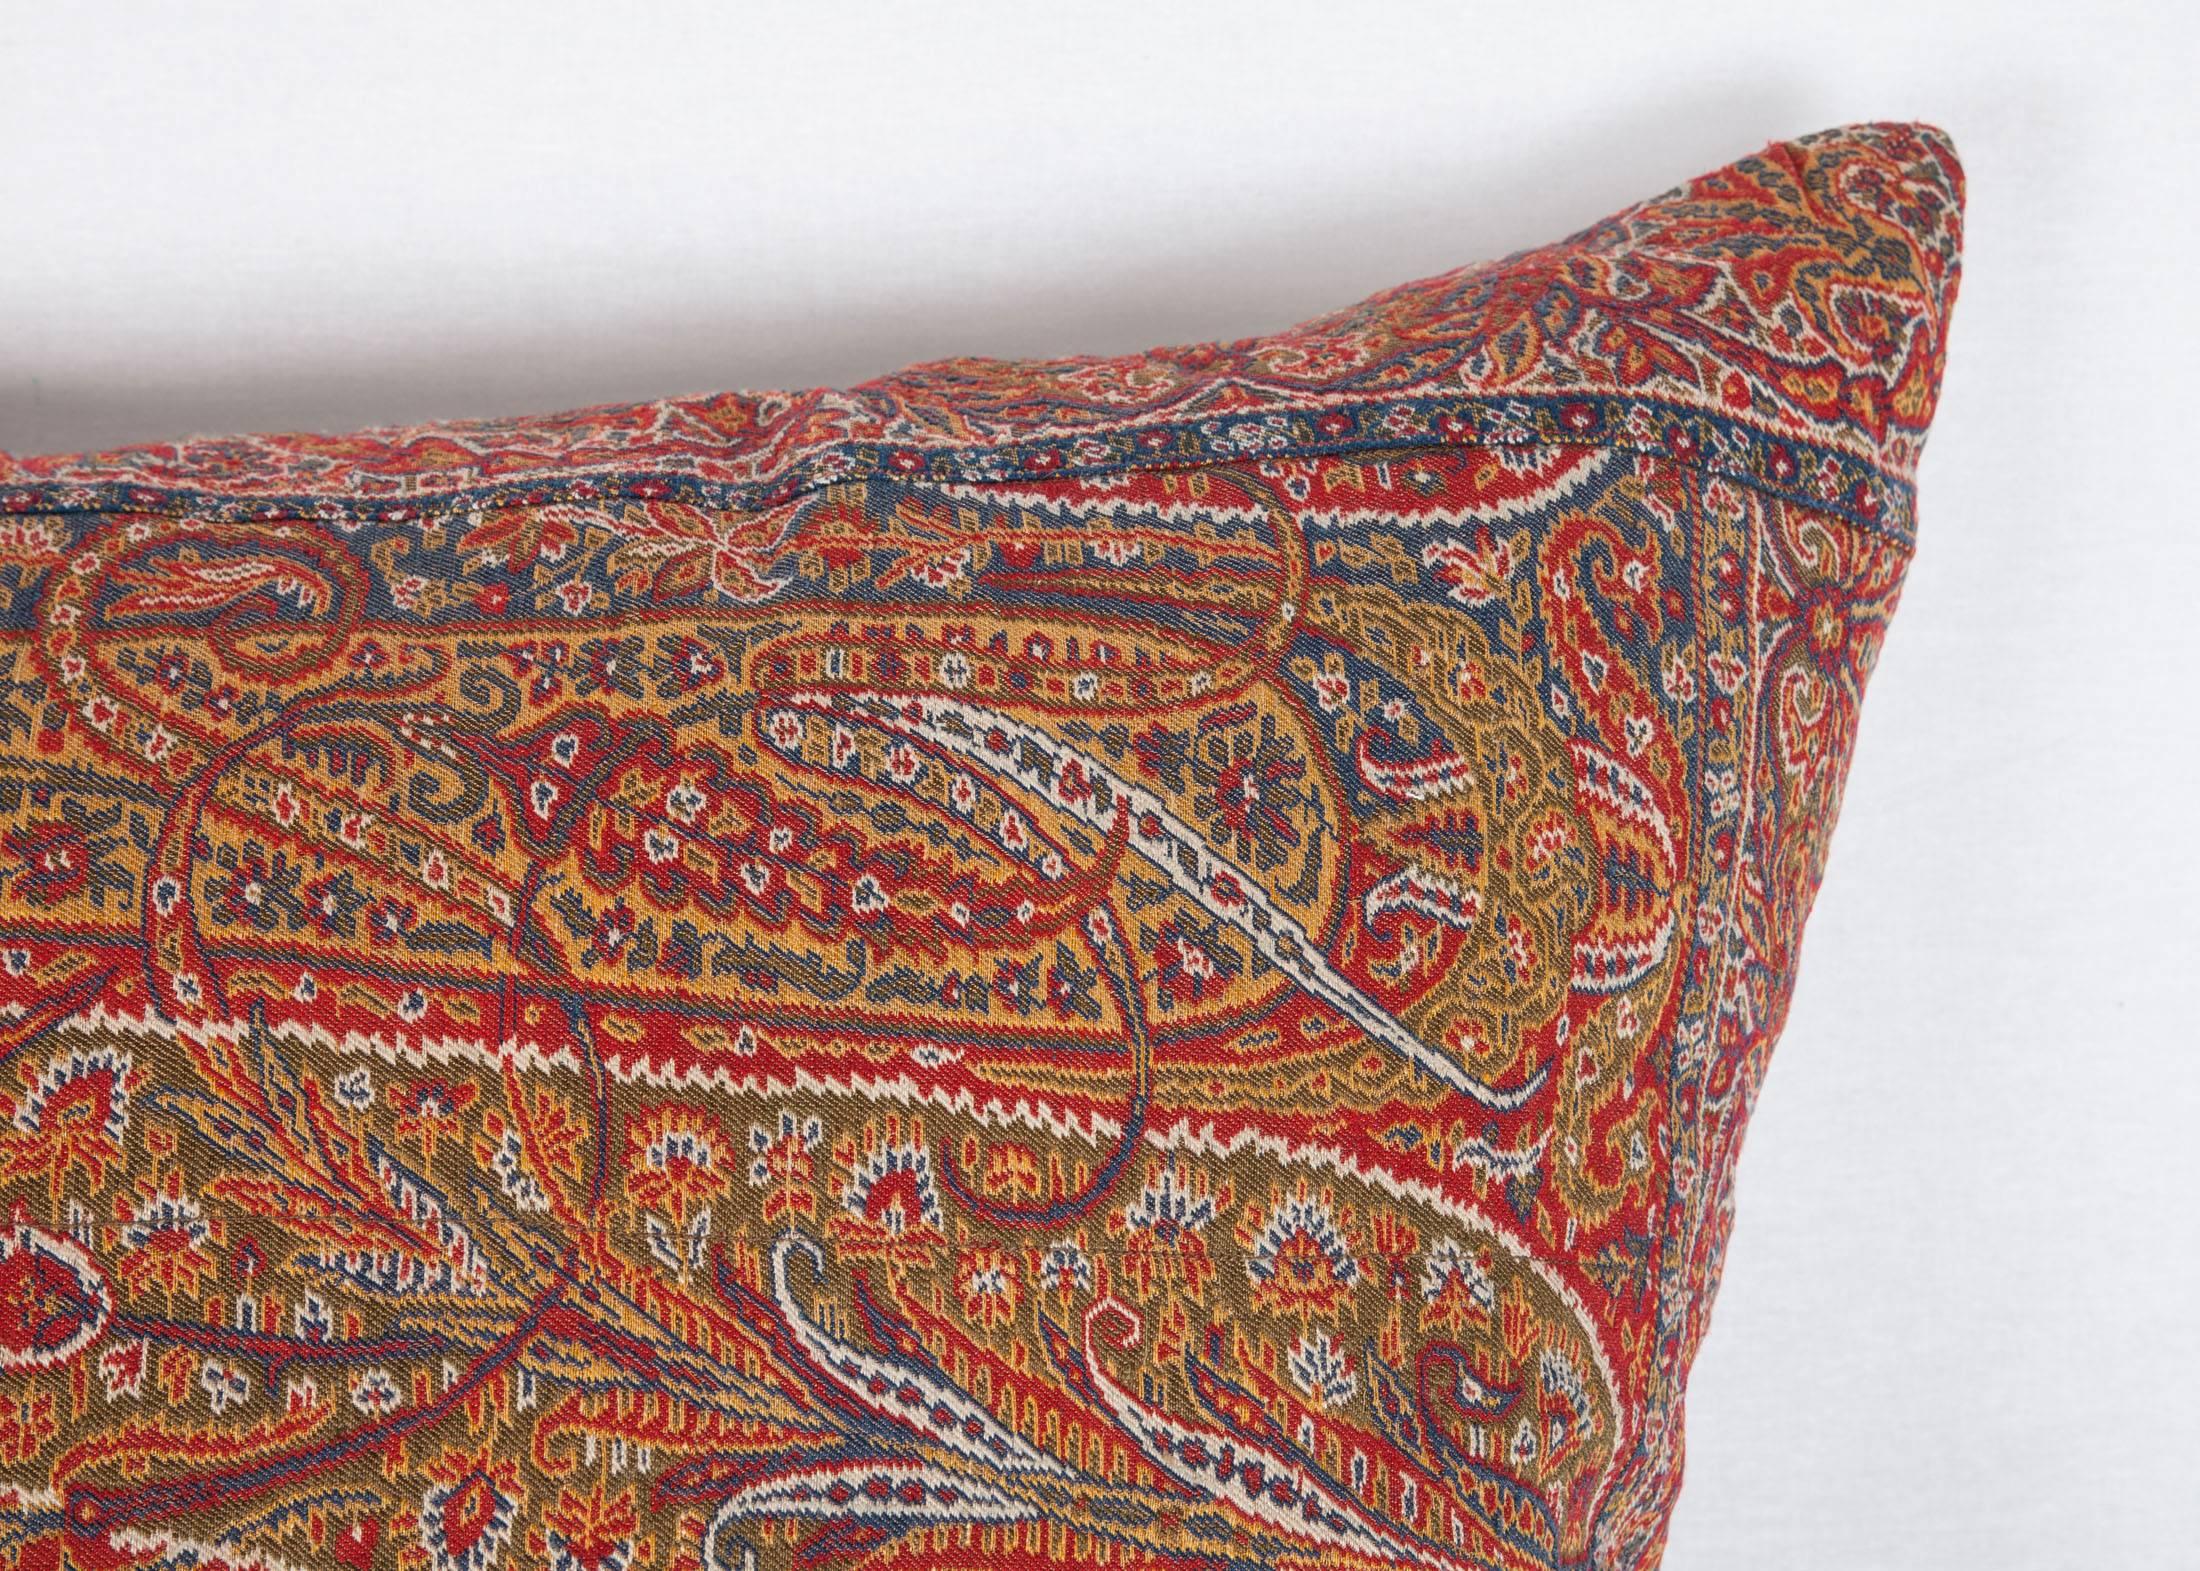 Woven Early 19th Century Paisley Wool Pillow